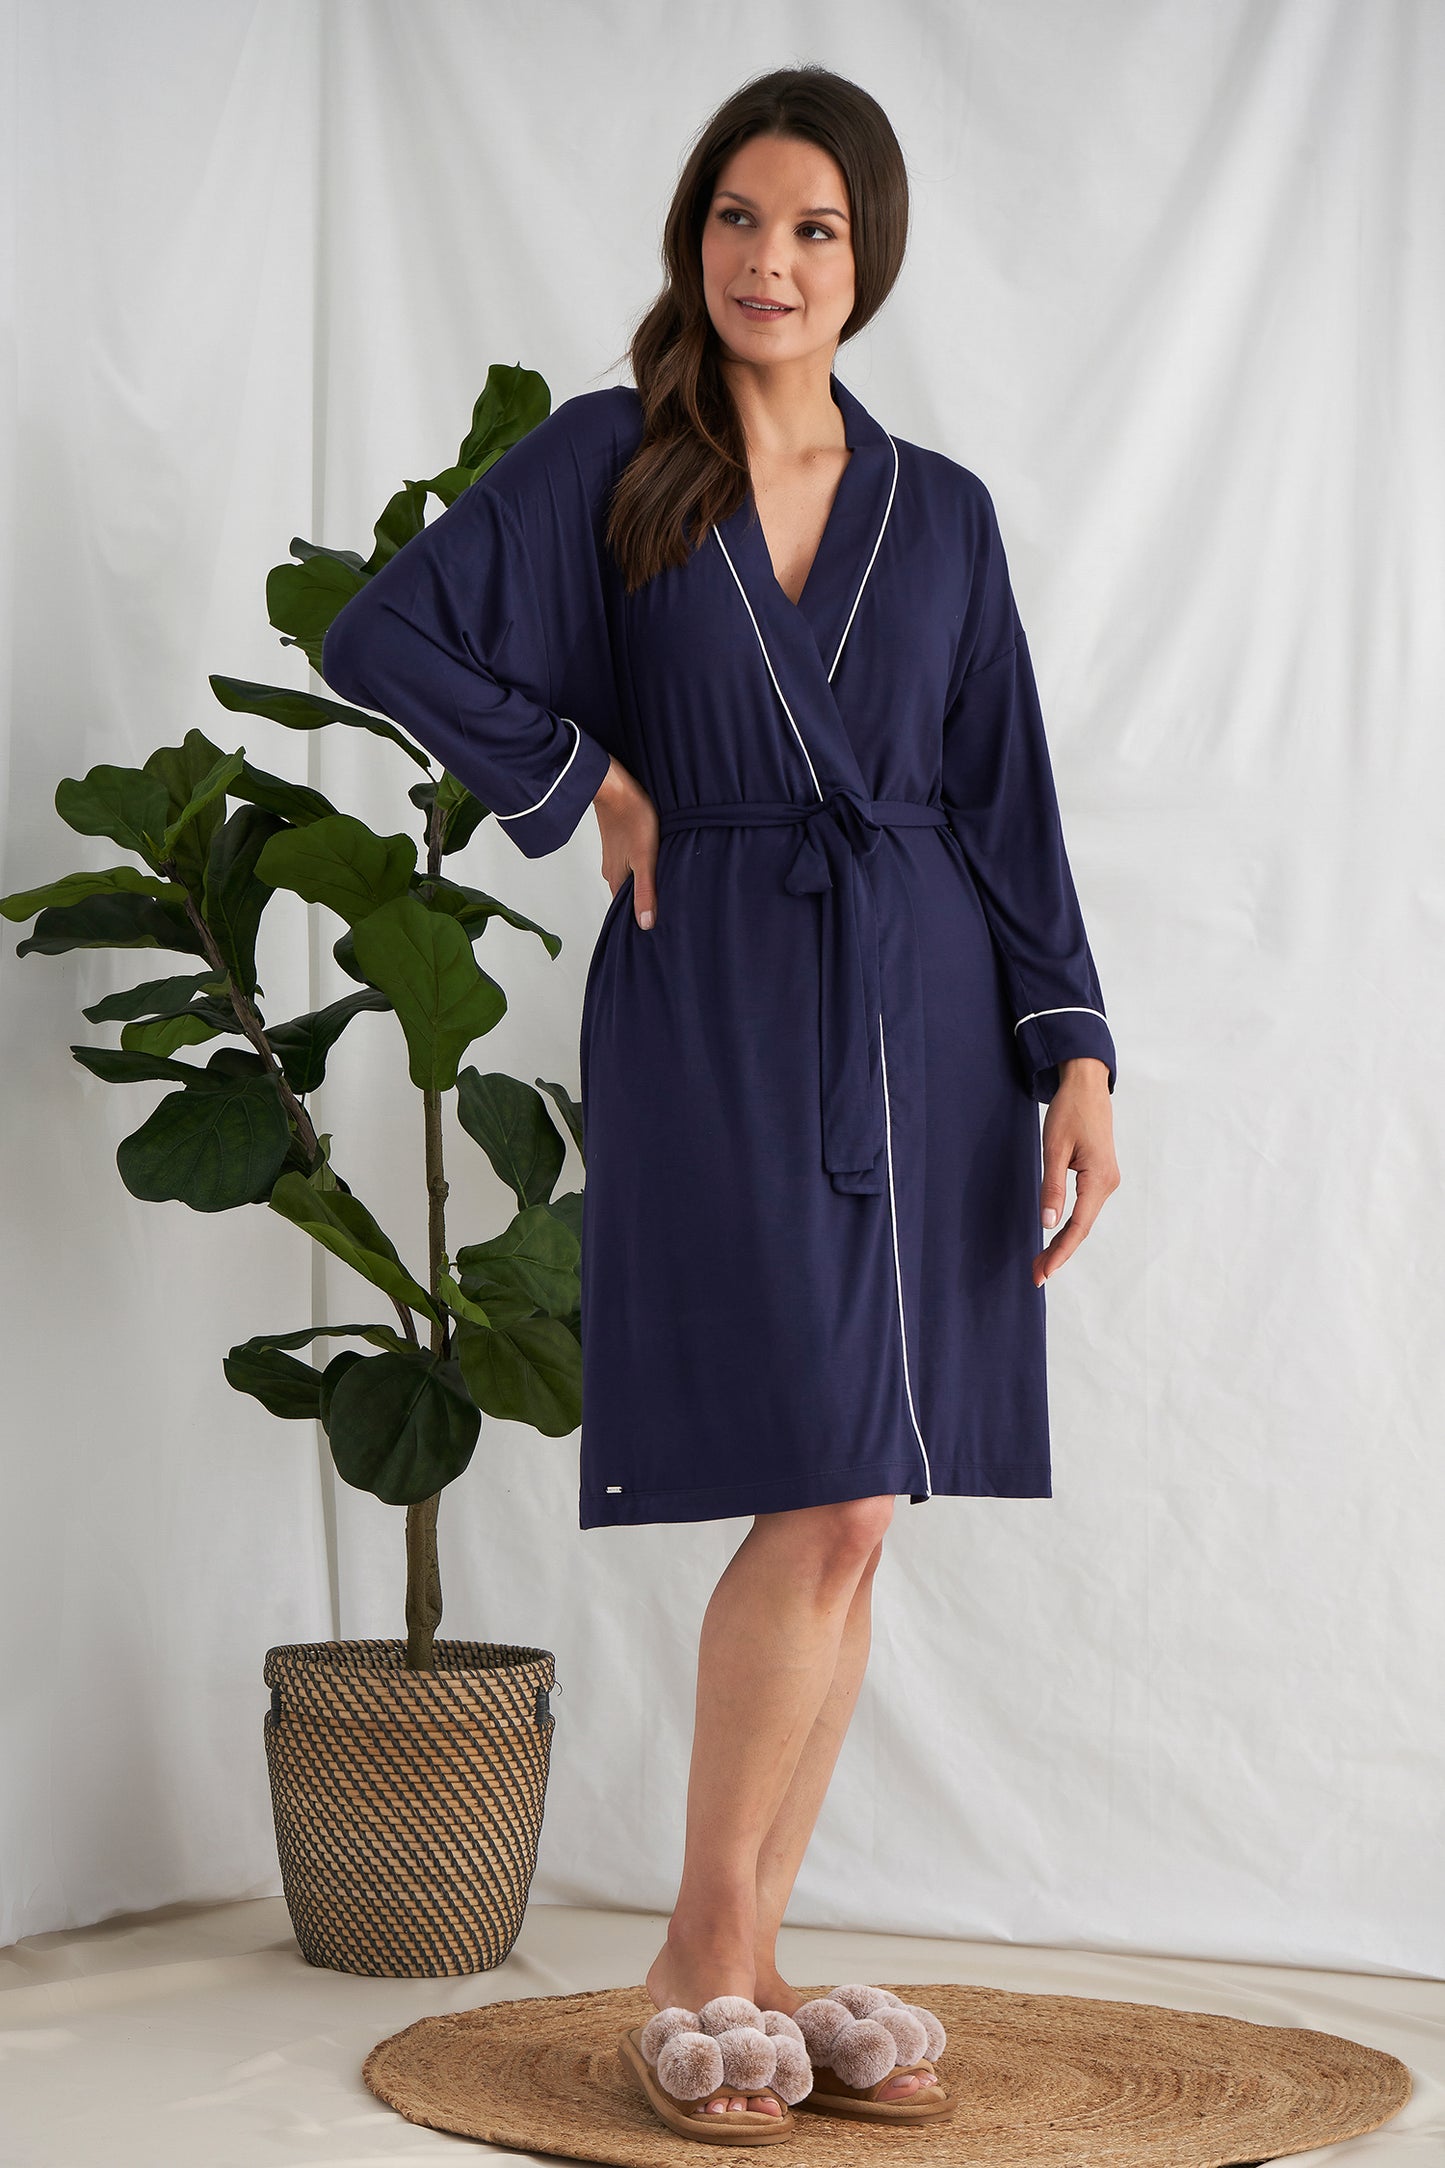 Women's Bamboo Kimono Robe in Midnight Blue with functional tie and deep pockets from Pretty You London